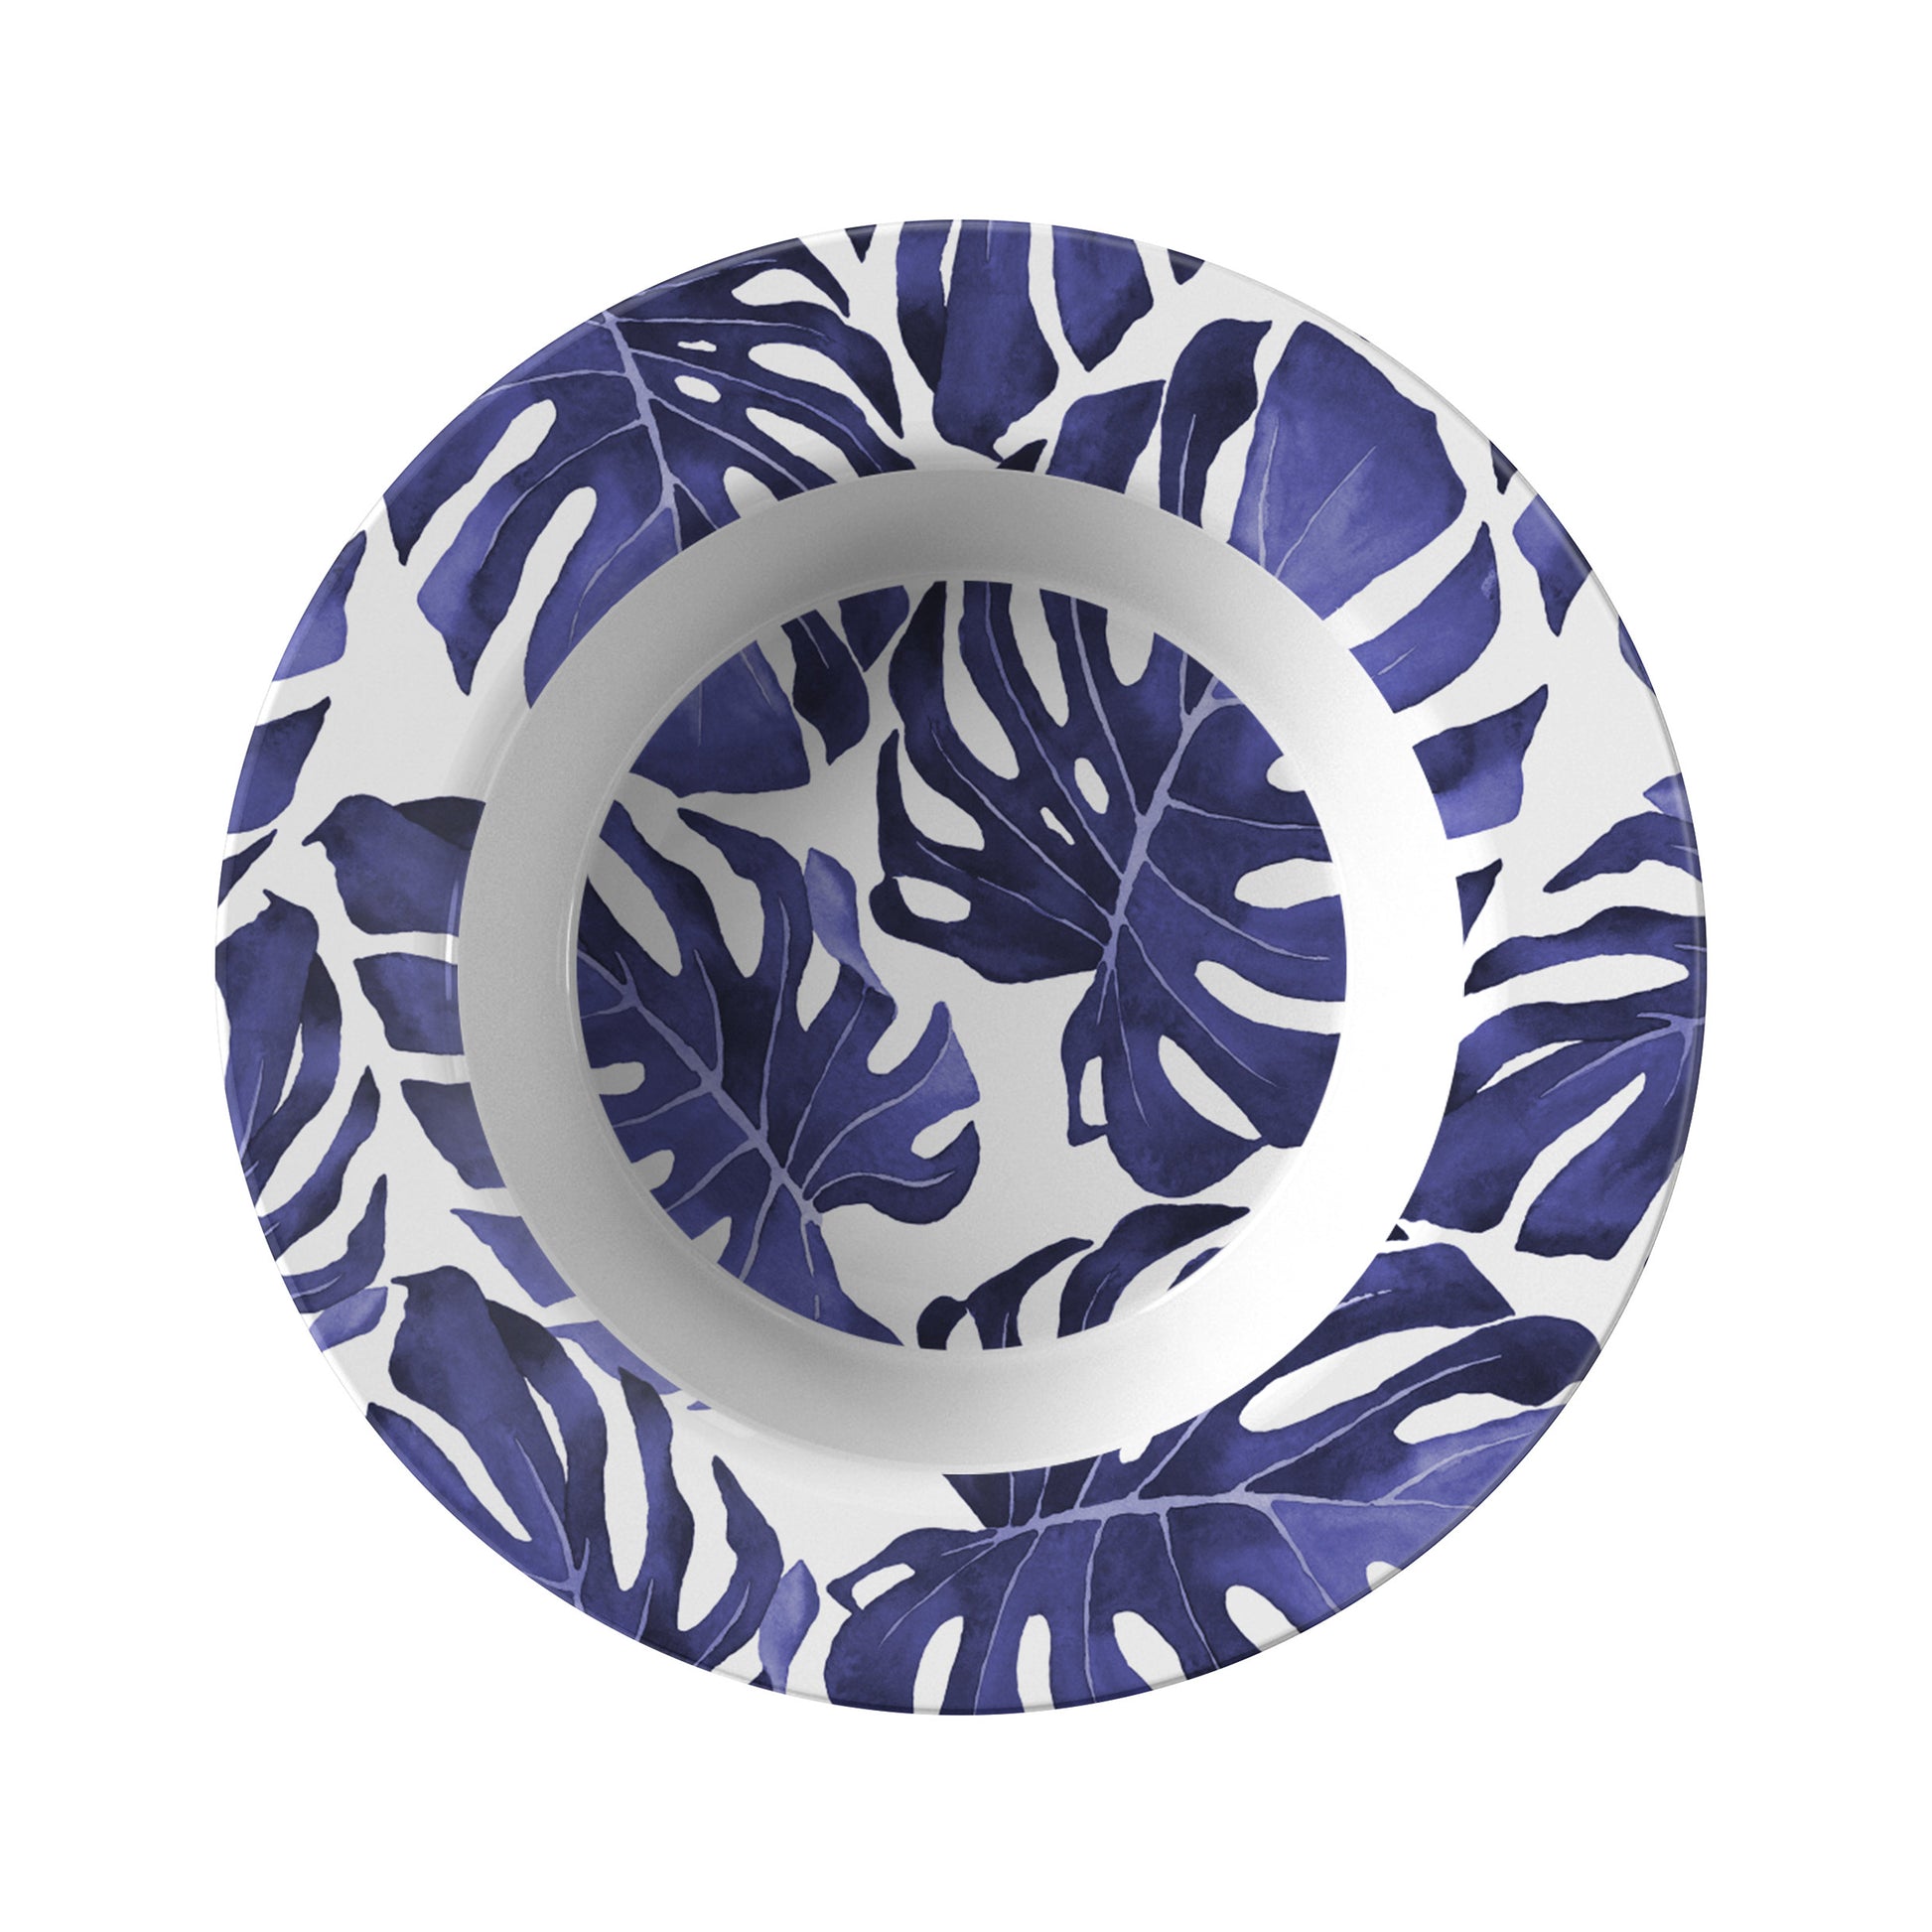 Wide rim soup bowl made of plastic with blue and white monstera leaf print.